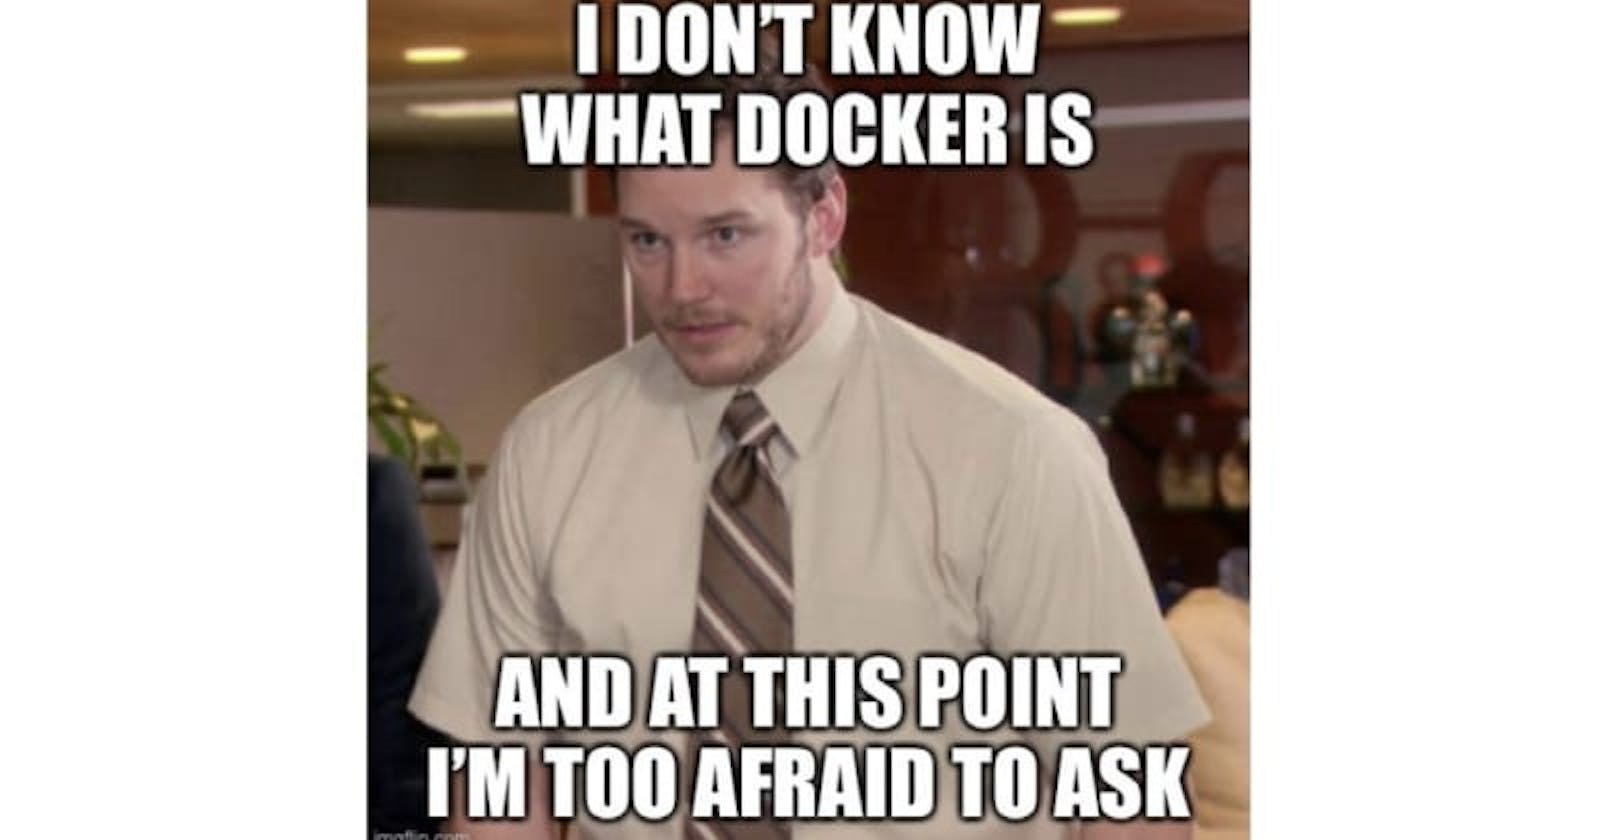 An “I don’t know what Docker is and at this point I’m too afraid to ask” guide to Docker.